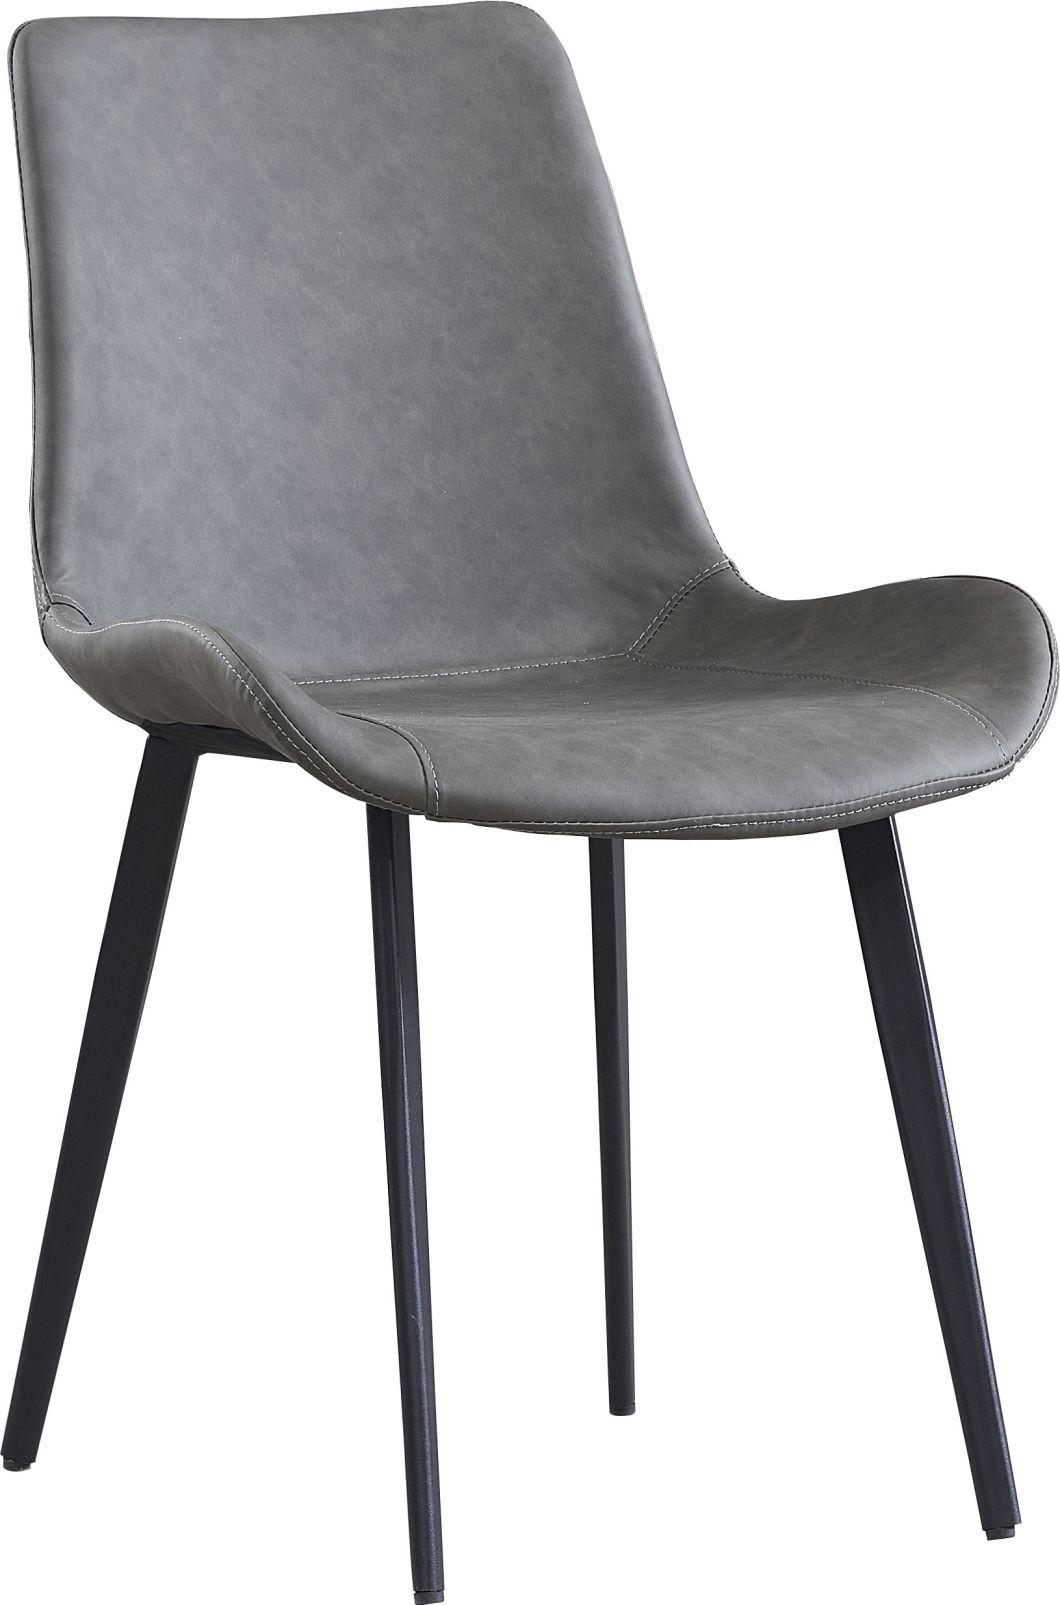 882 Dining Chair/Restaurant Chair/Modern Chair/Dining Chair in Microfiber Leather/Home Furniture /Hotel Furniture